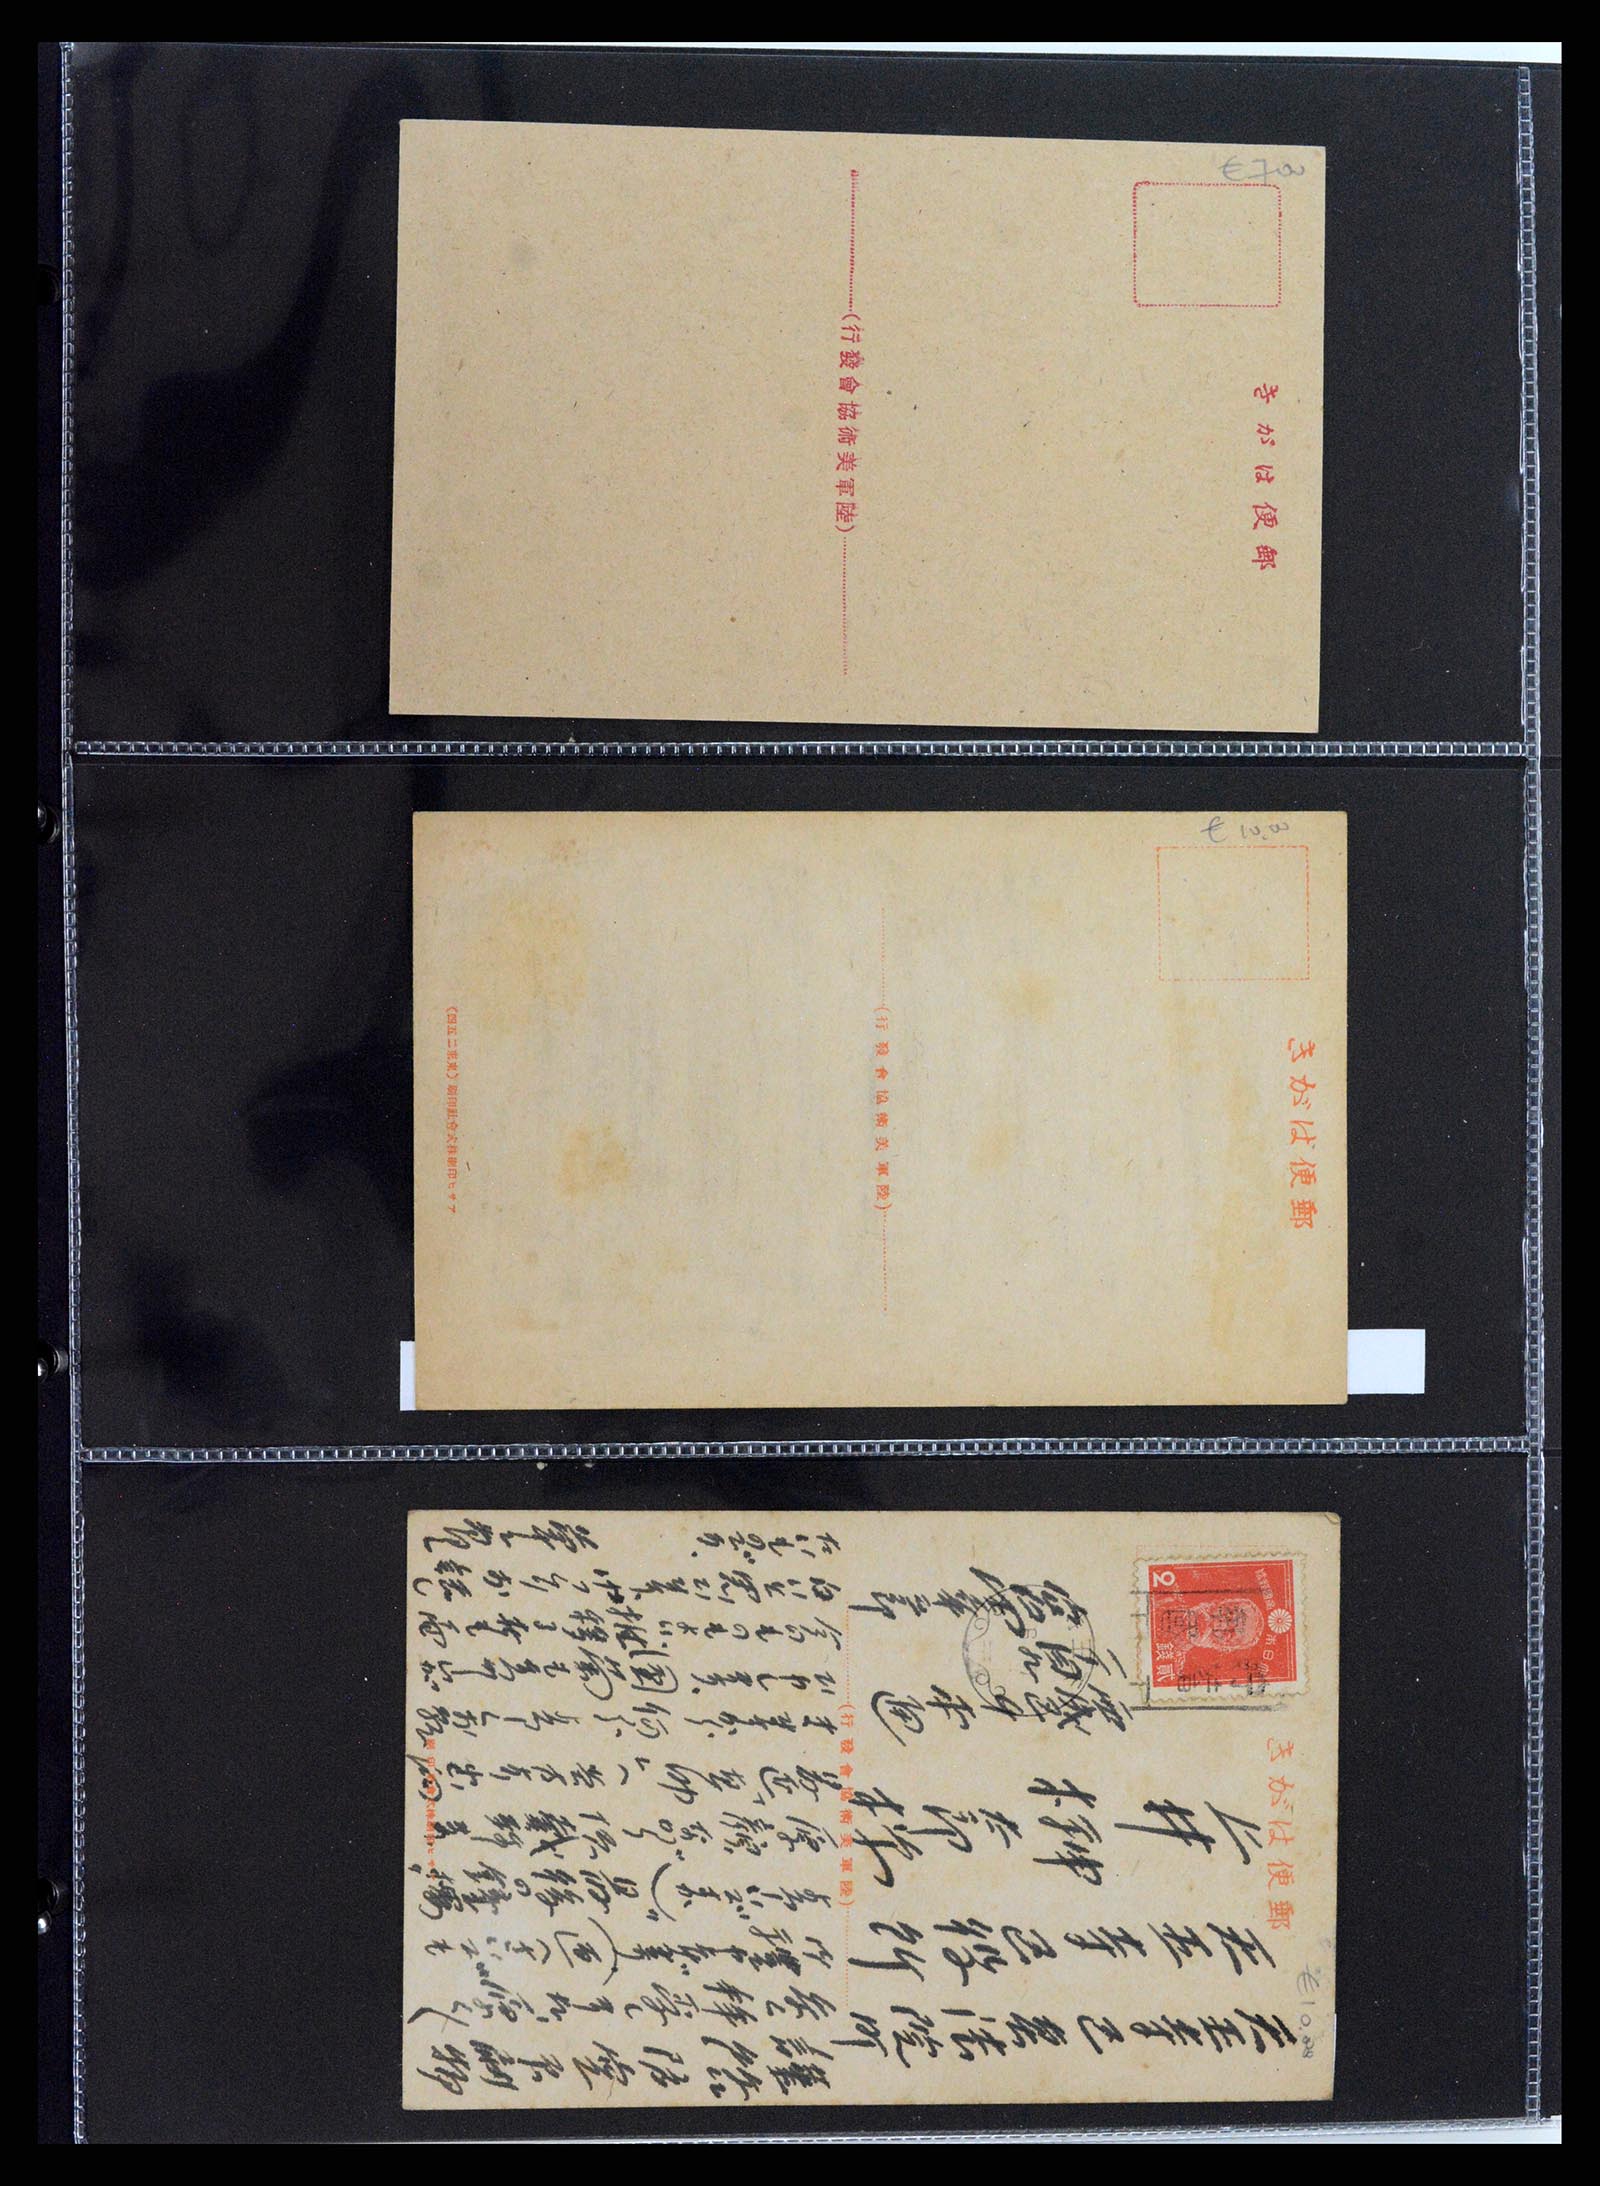 37423 043 - Stamp collection 37423 Dutch Indies Japanese occupation covers 1942-1945